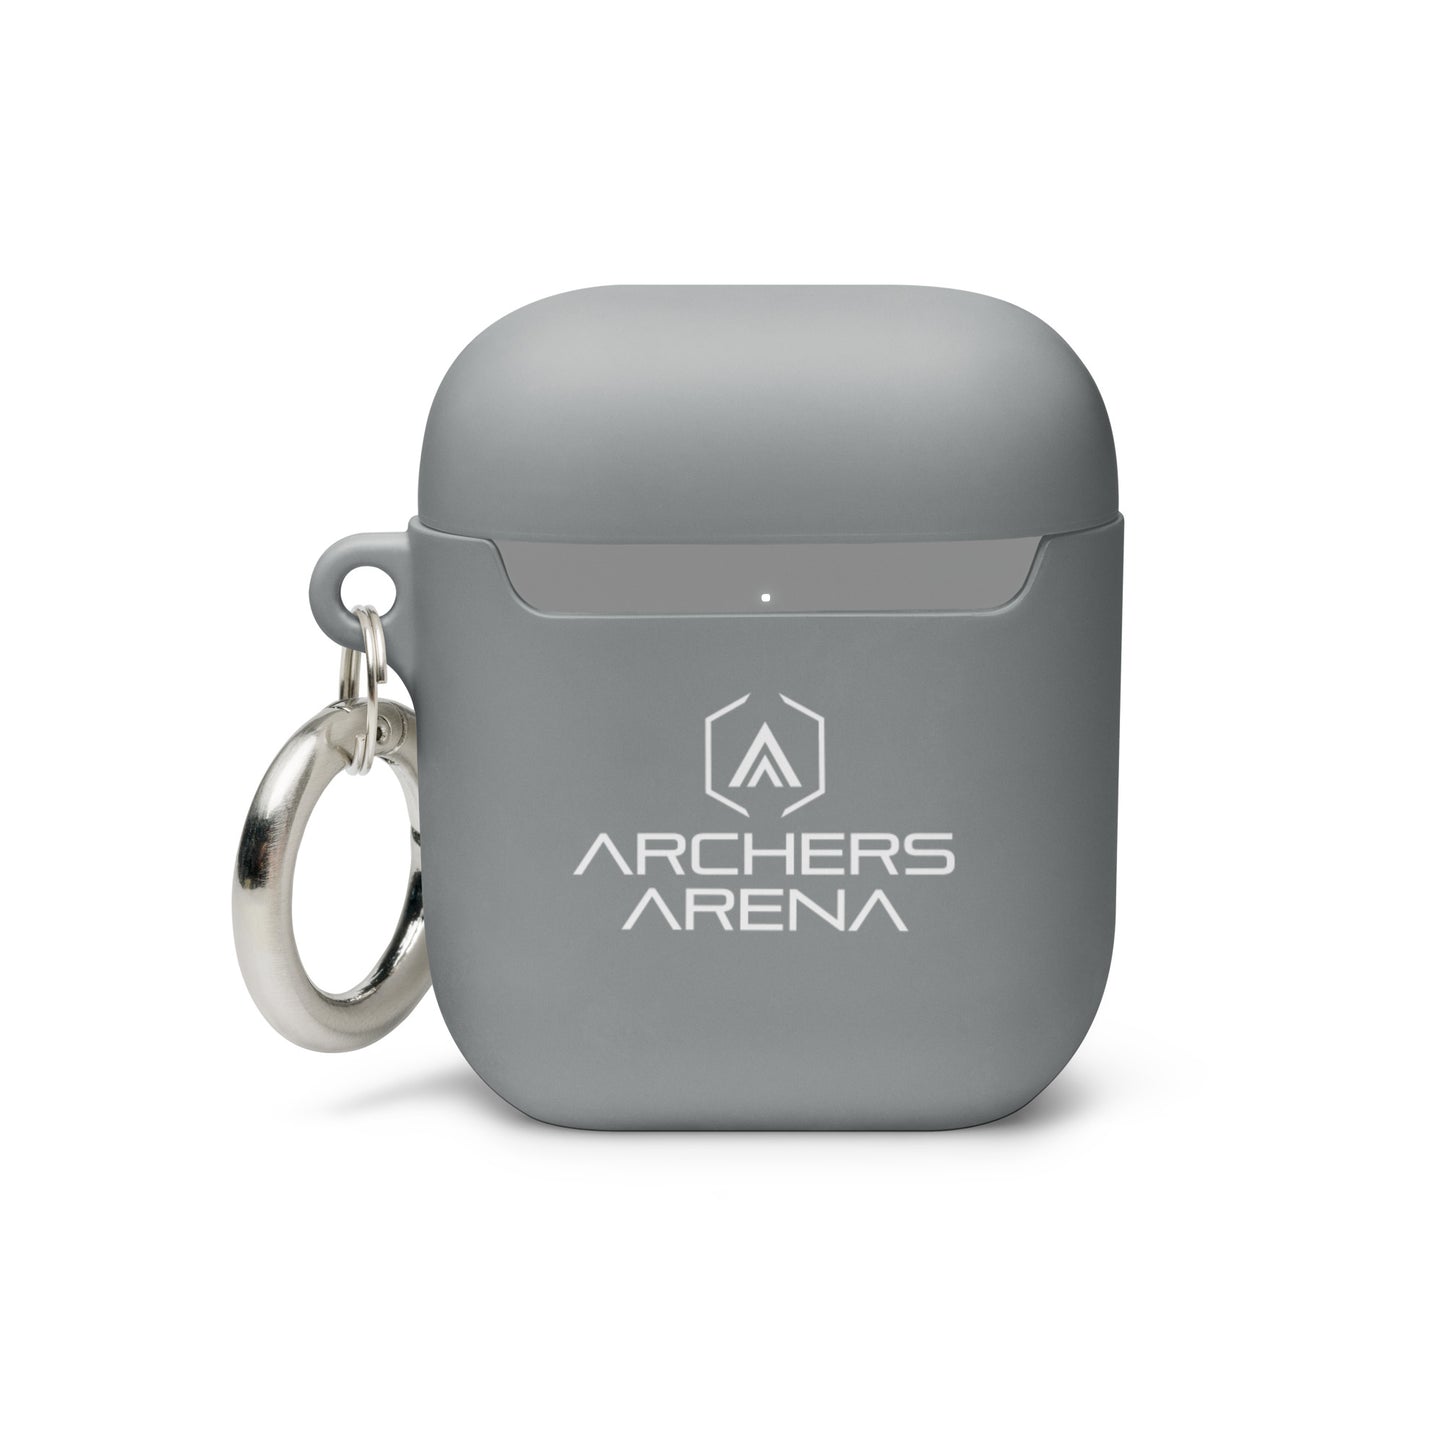 Archers Arena AirPods case